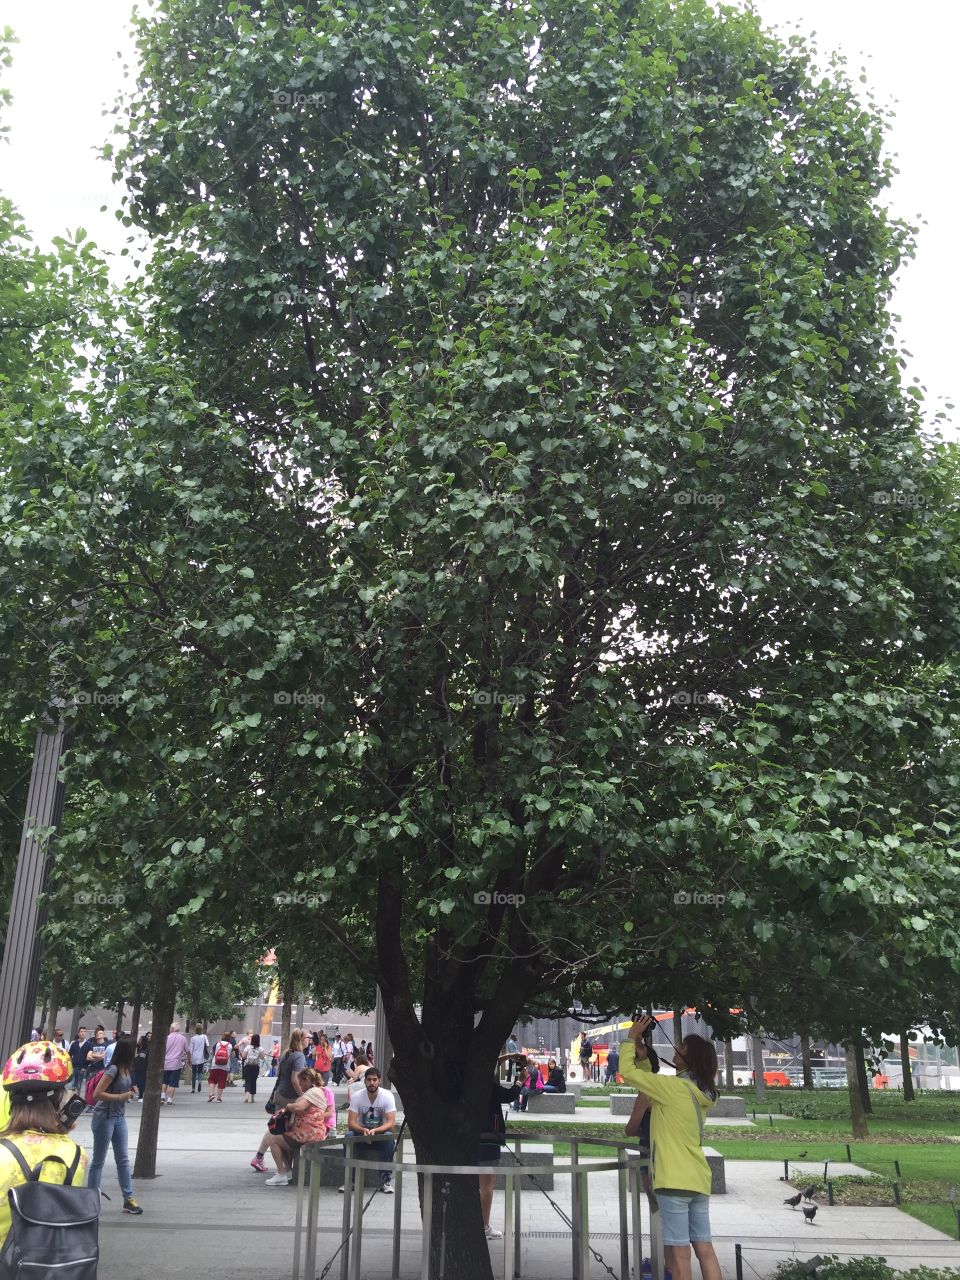 The survivor tree NY. The last callery pear tree that survived 9/11 (until they planted more) 